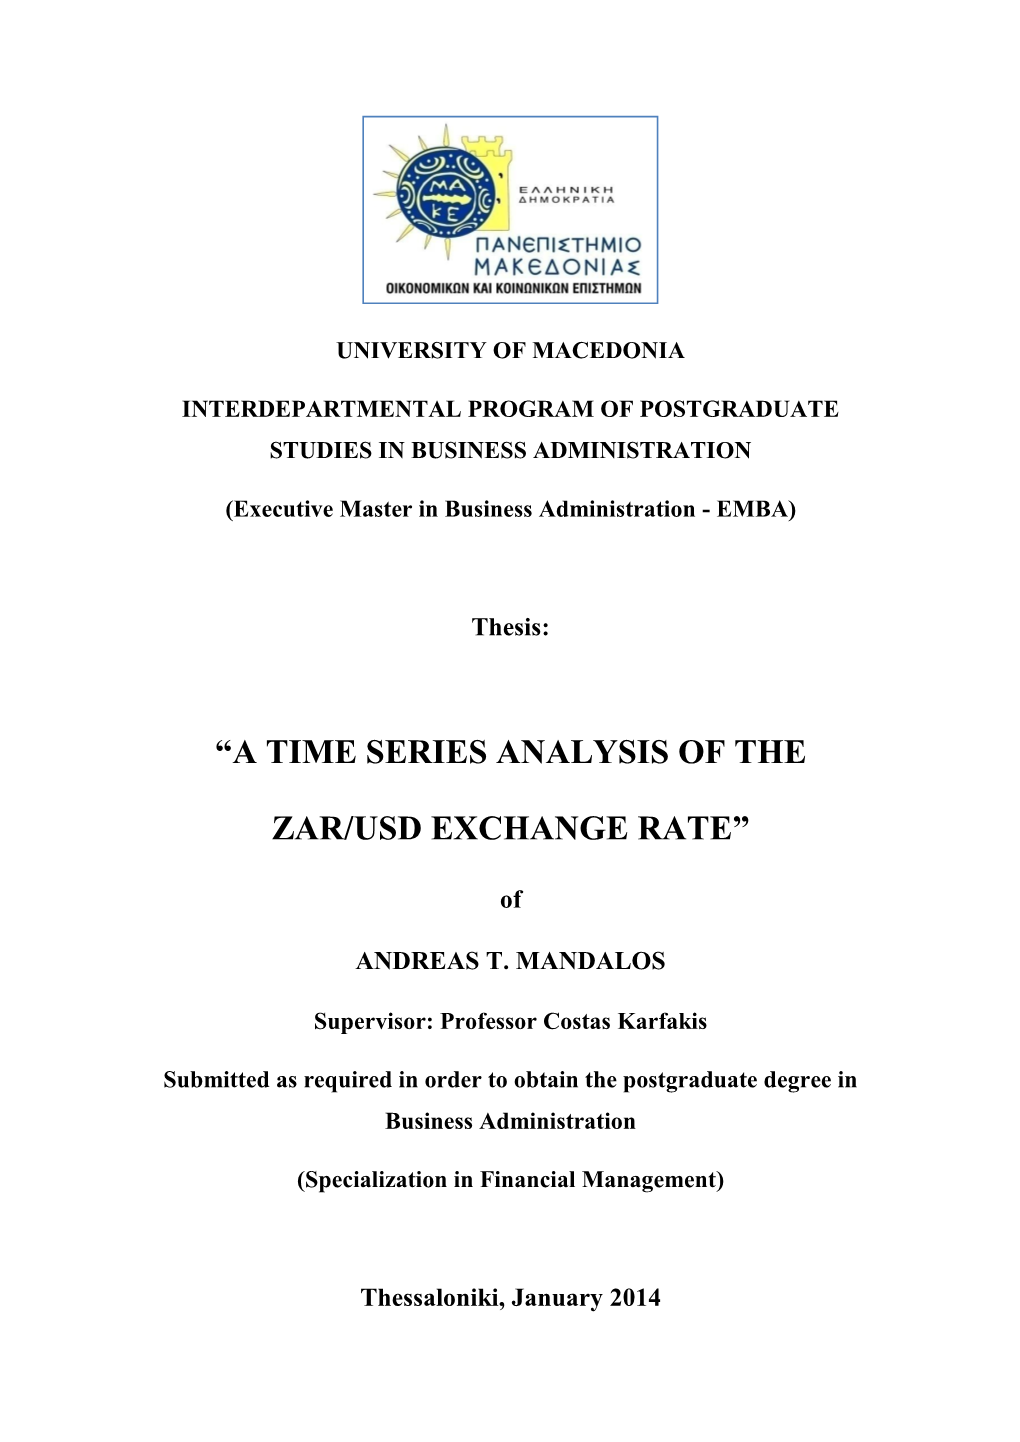 “A Time Series Analysis of the Zar/Usd Exchange Rate”